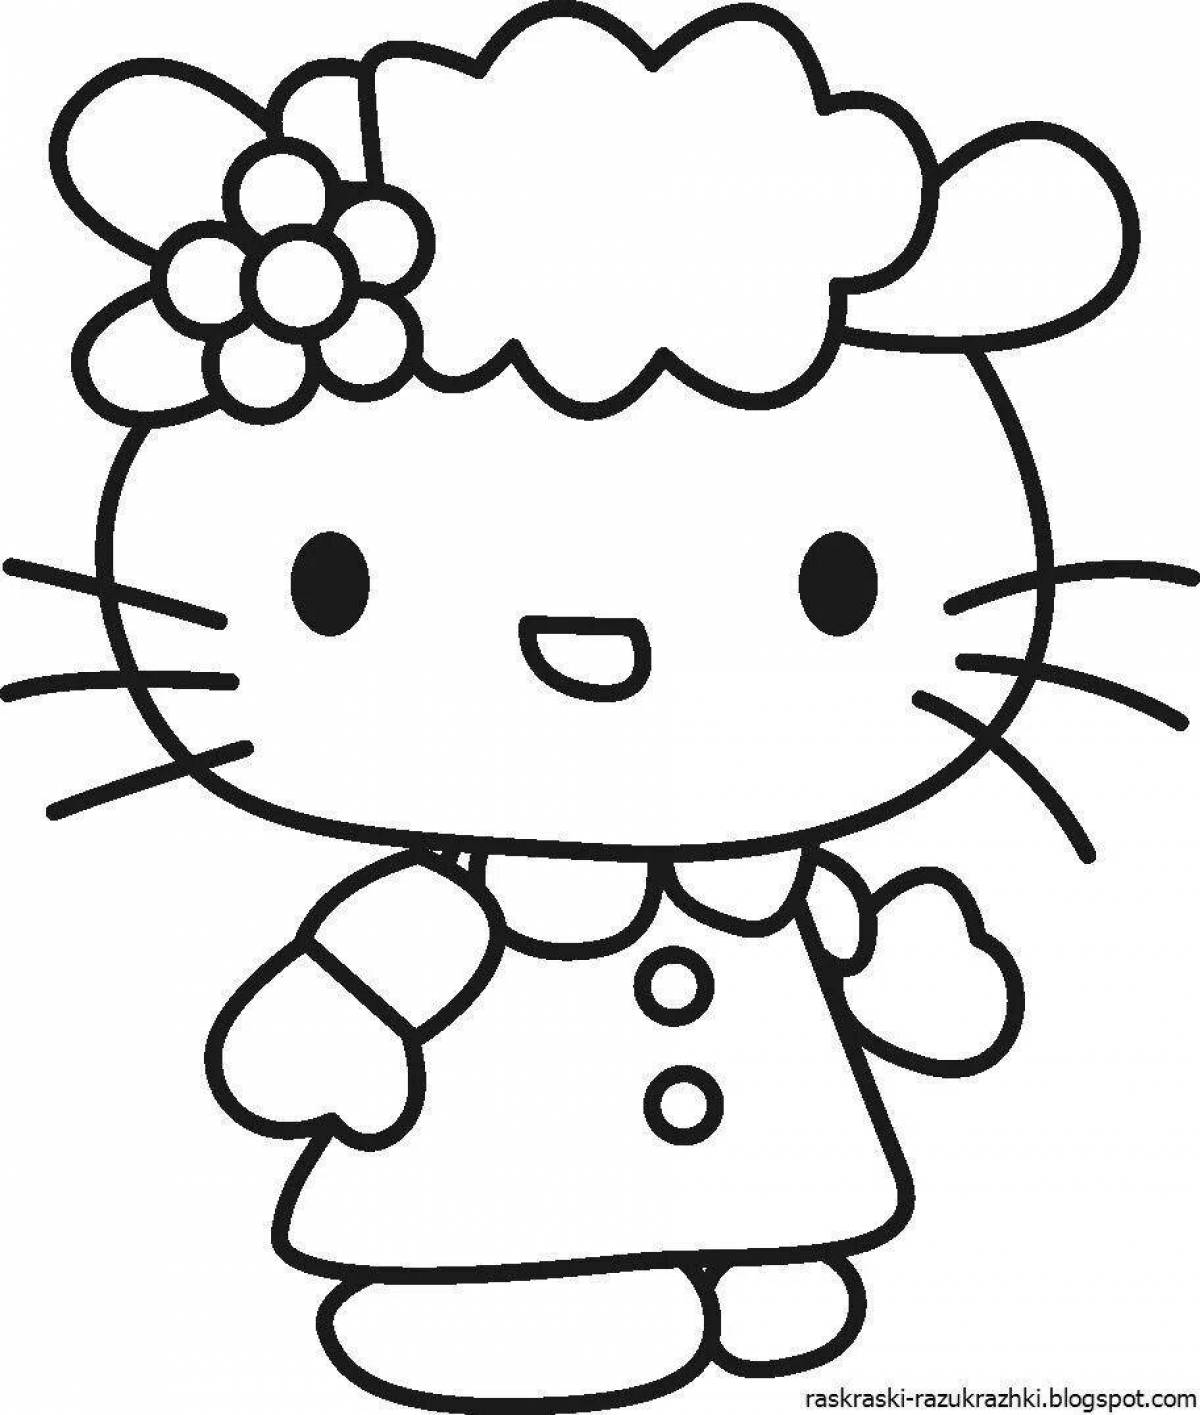 Amazing coloring pages for girls, large